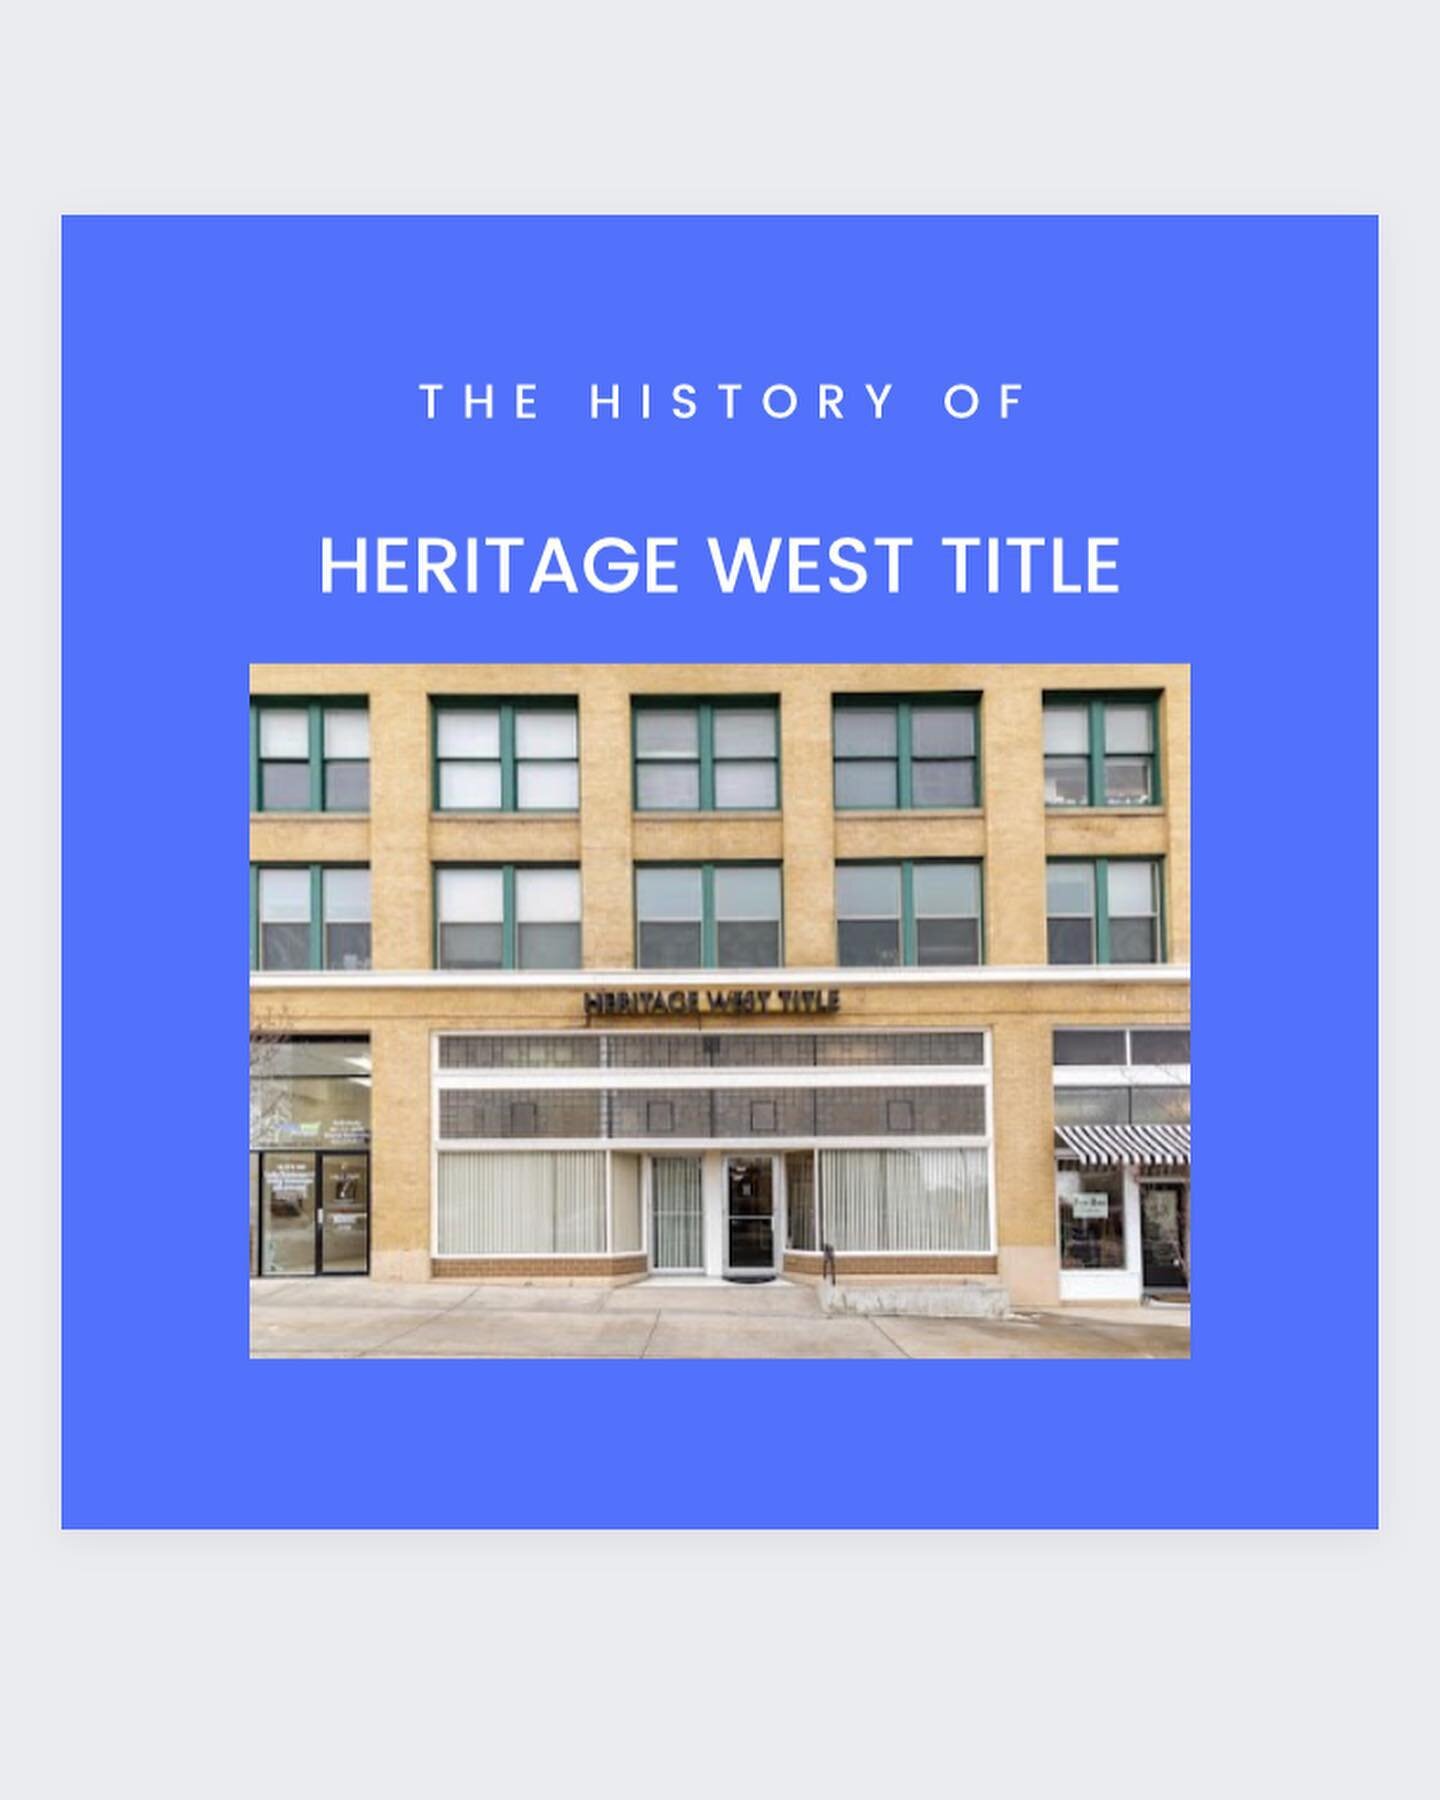 Heritage West Title&rsquo;s history dates back to the 1940s when S. Norman Lee operated under Lee and Dunn Abstracting. After decades of changes in management and locations, Heritage West Title has returned to operate in the very same office S. Norma